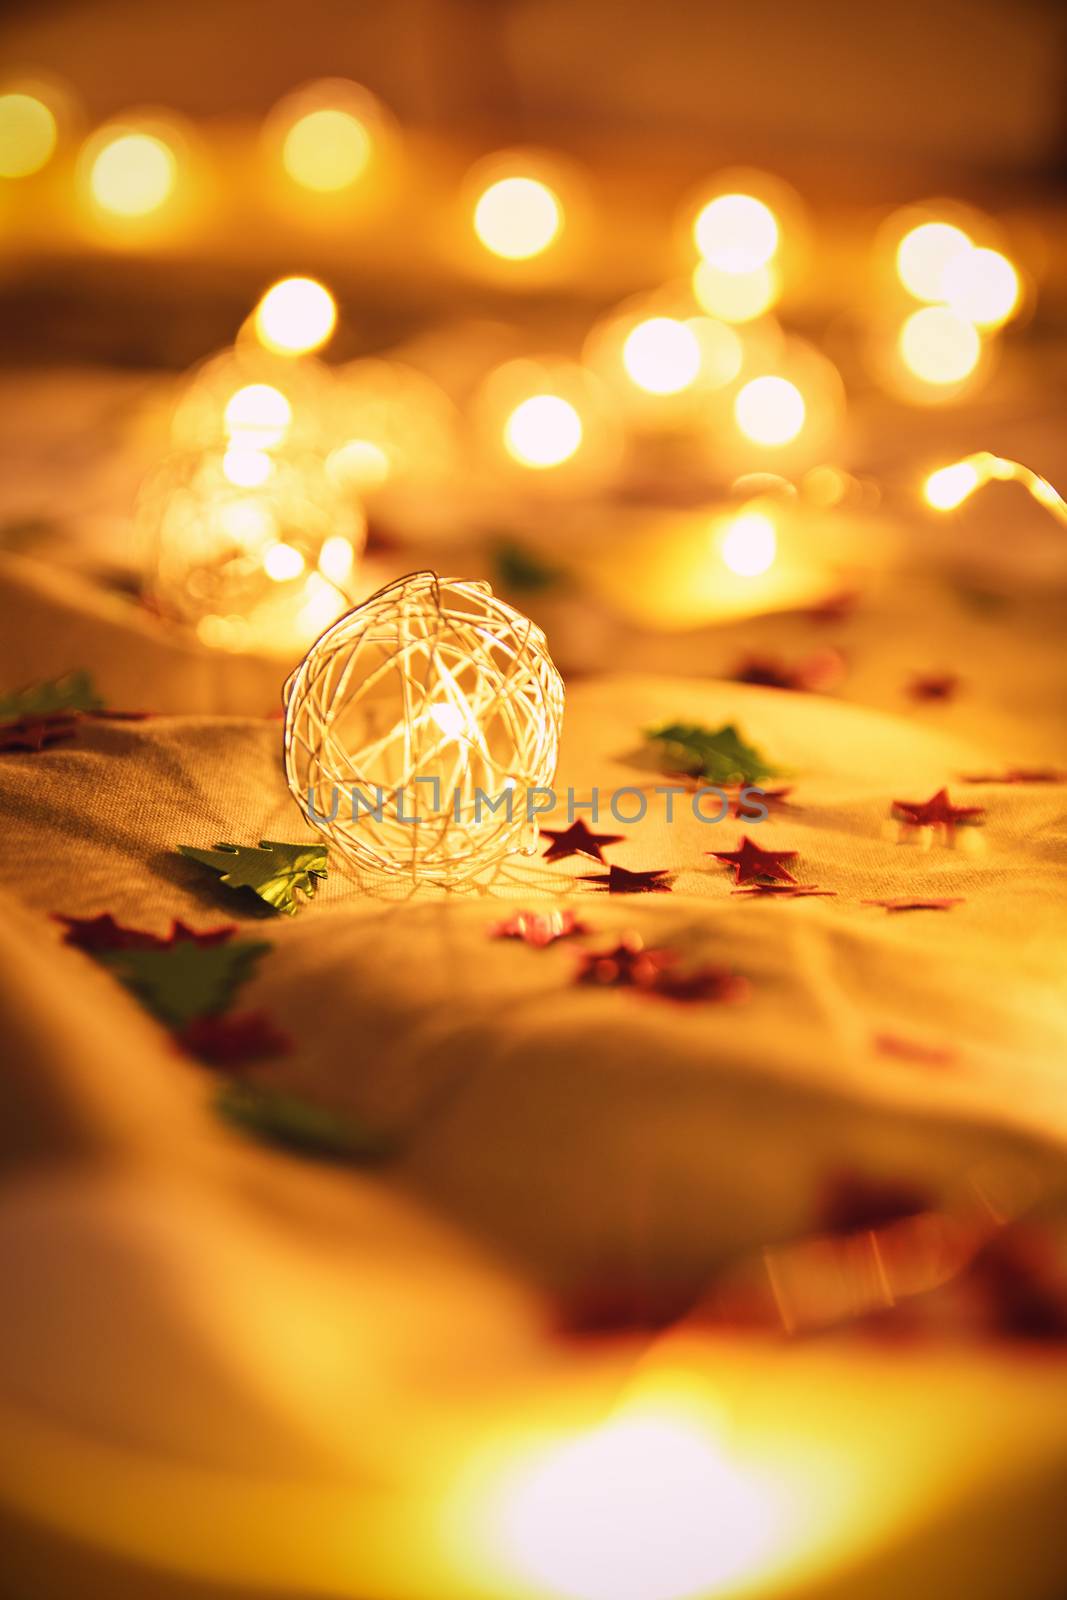 Blurred golden Christmas lights with decorations on rumpled bed sheets by Mendelex